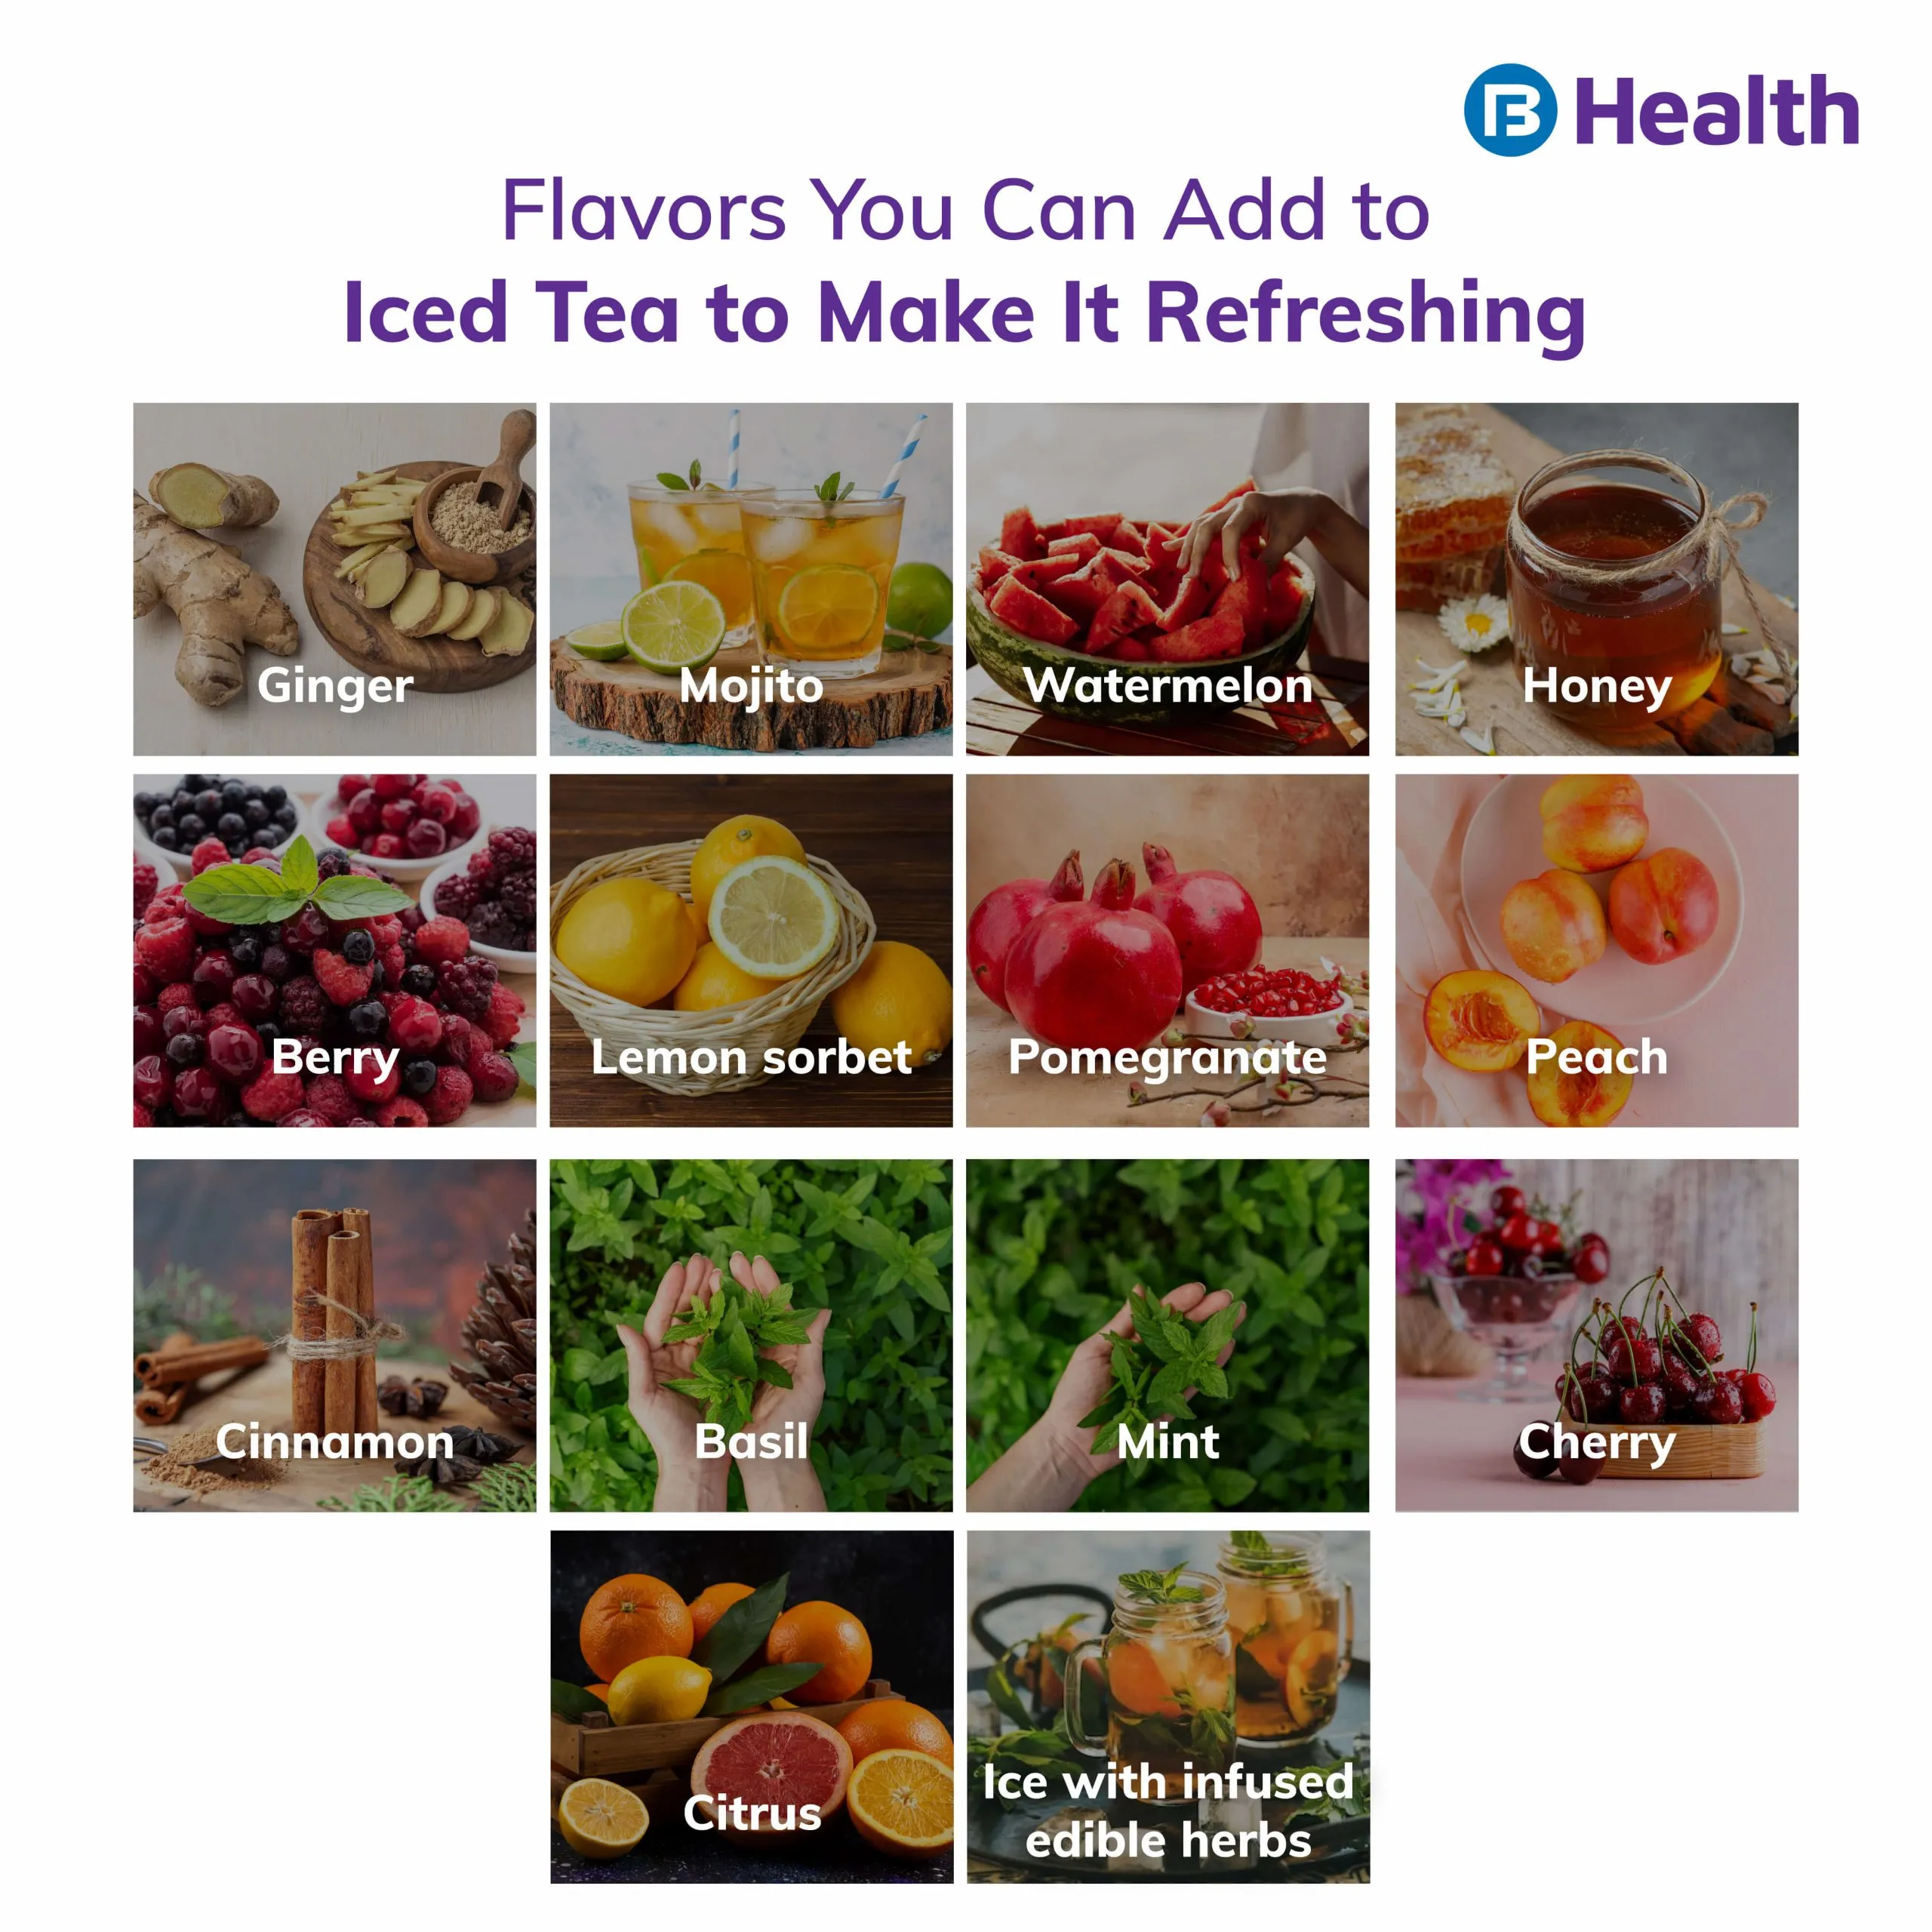 add these flavors to Iced Tea infographics